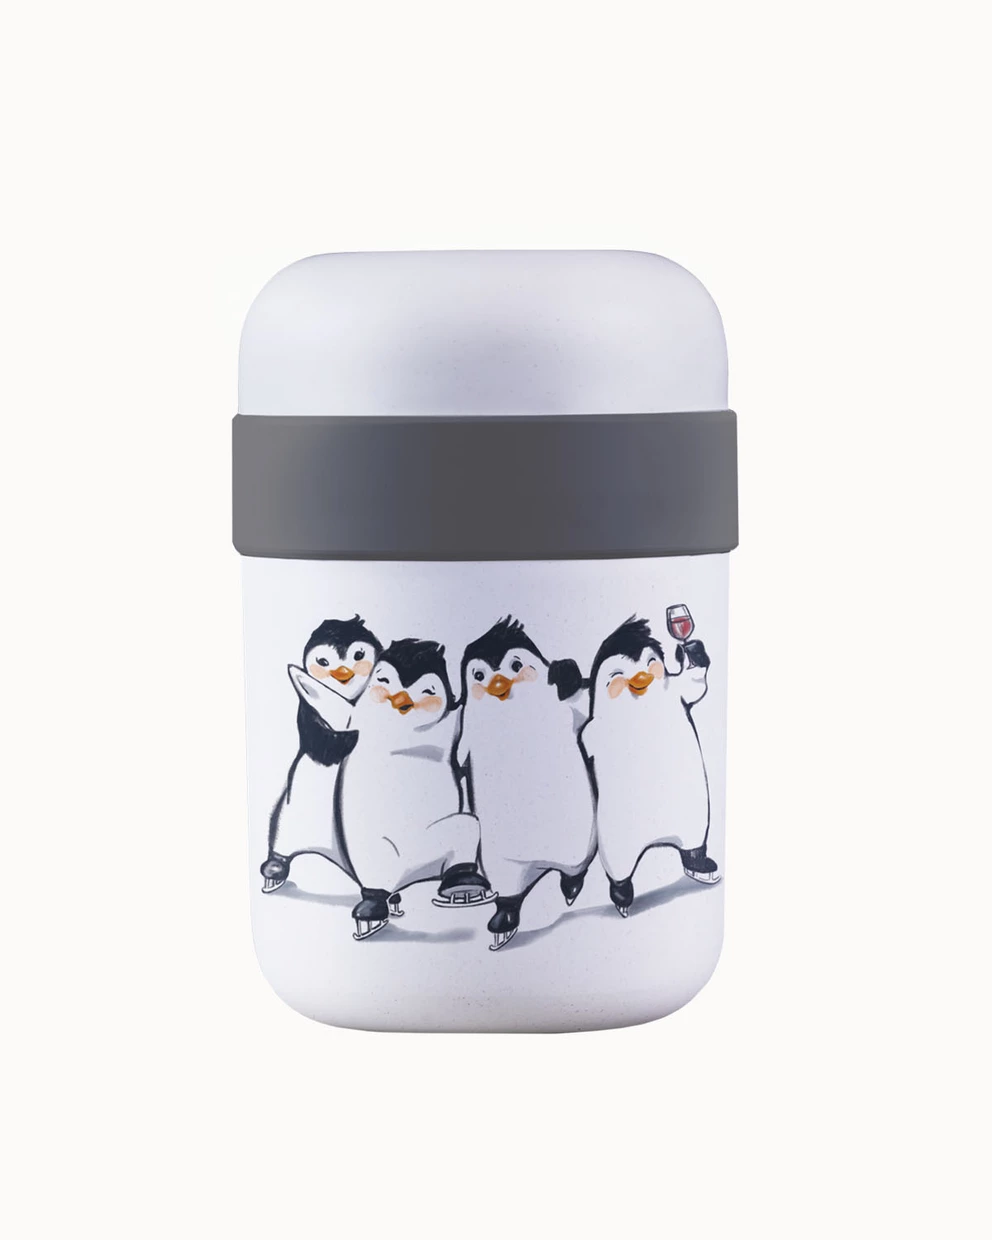 chic.mic - bioloco plant - Lunchpot - "Penguins"